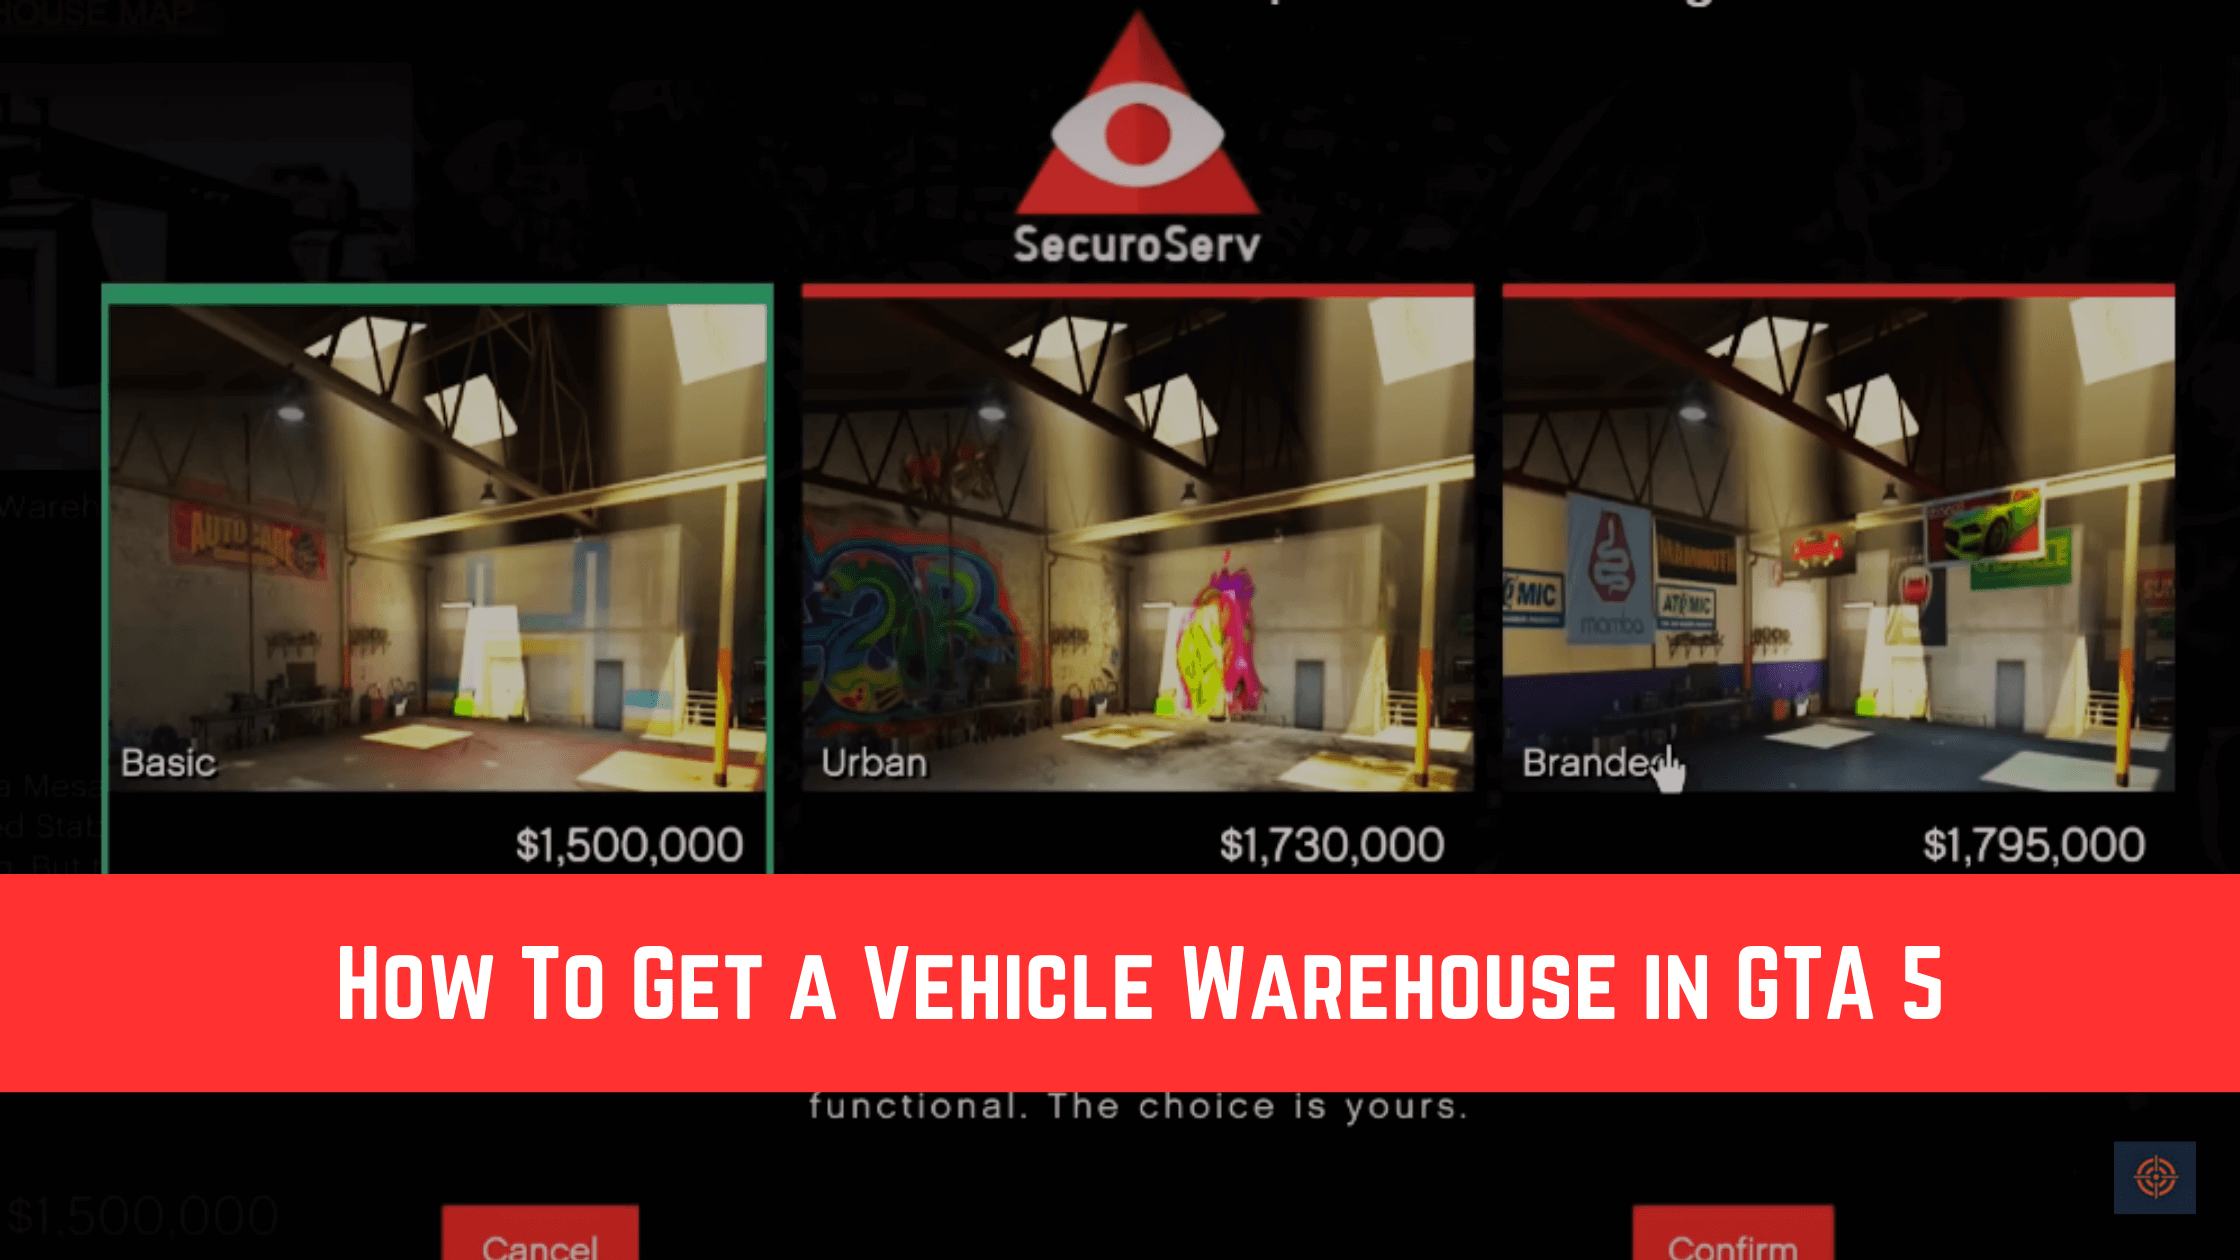 How To Get a Vehicle Warehouse in GTA 5